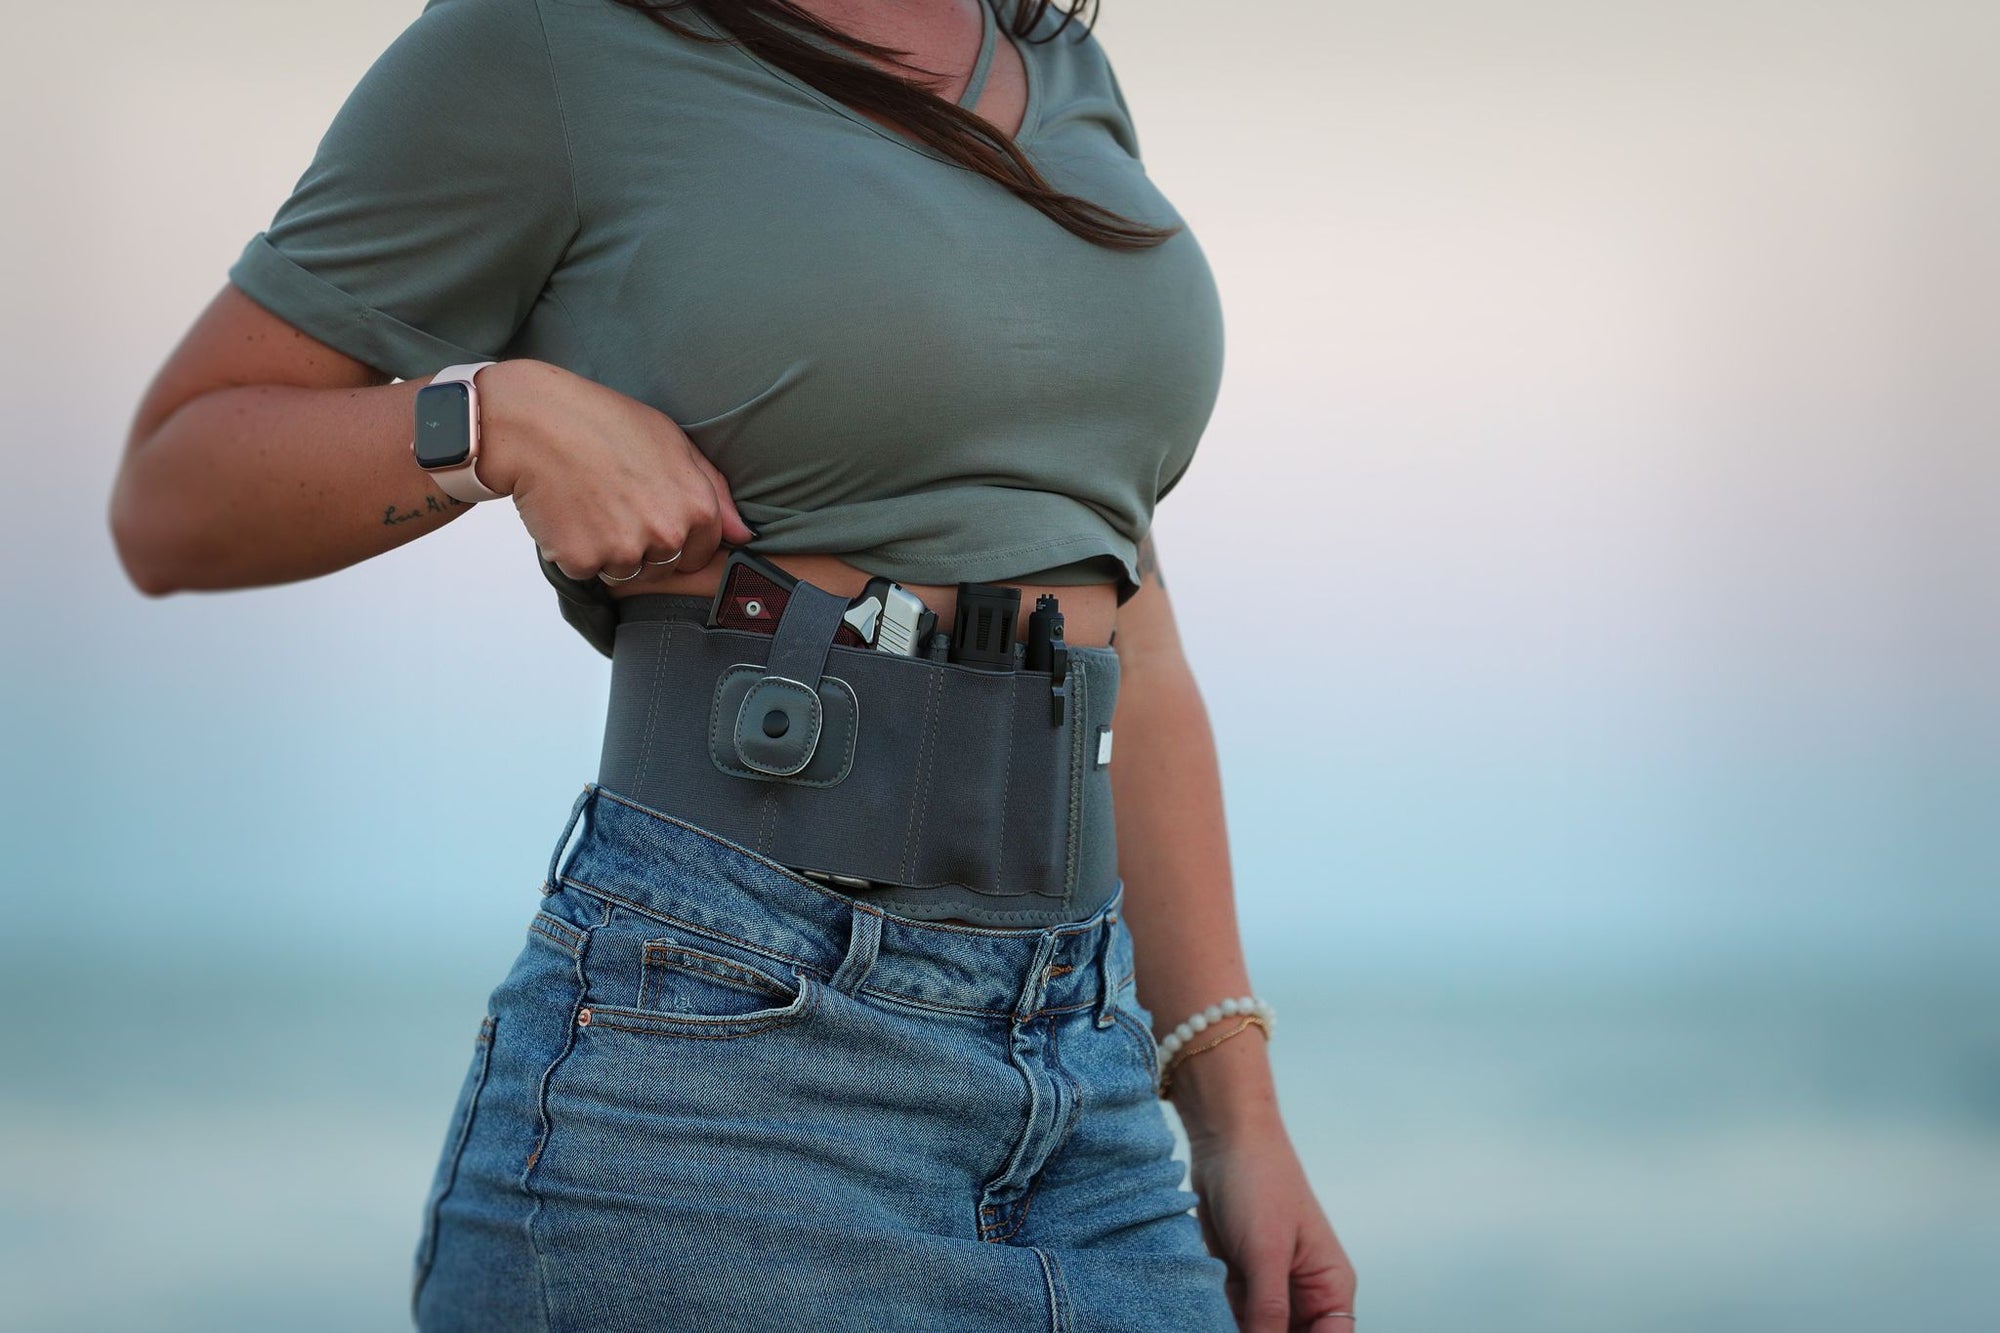 Learn to Conceal Carry in 5 Steps!